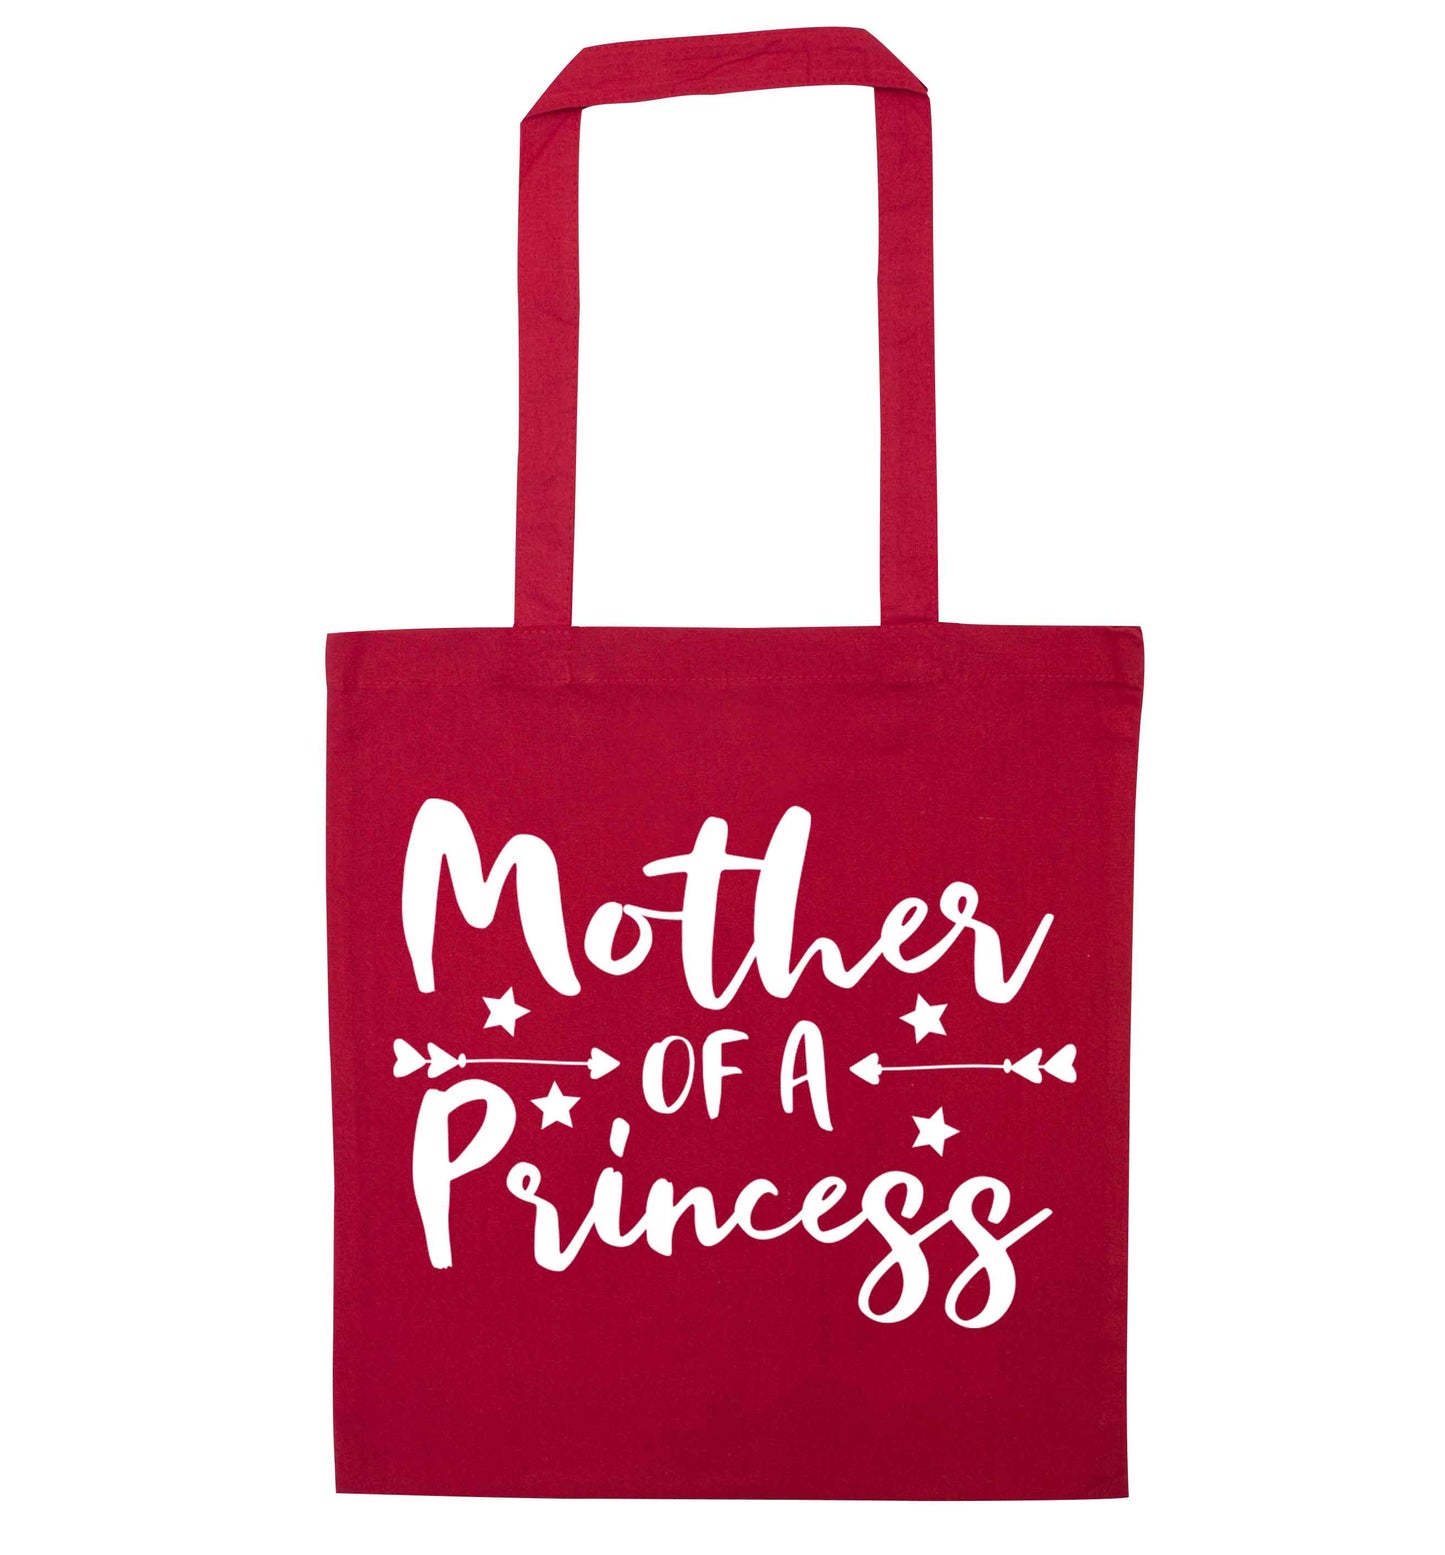 Mother of a princess red tote bag